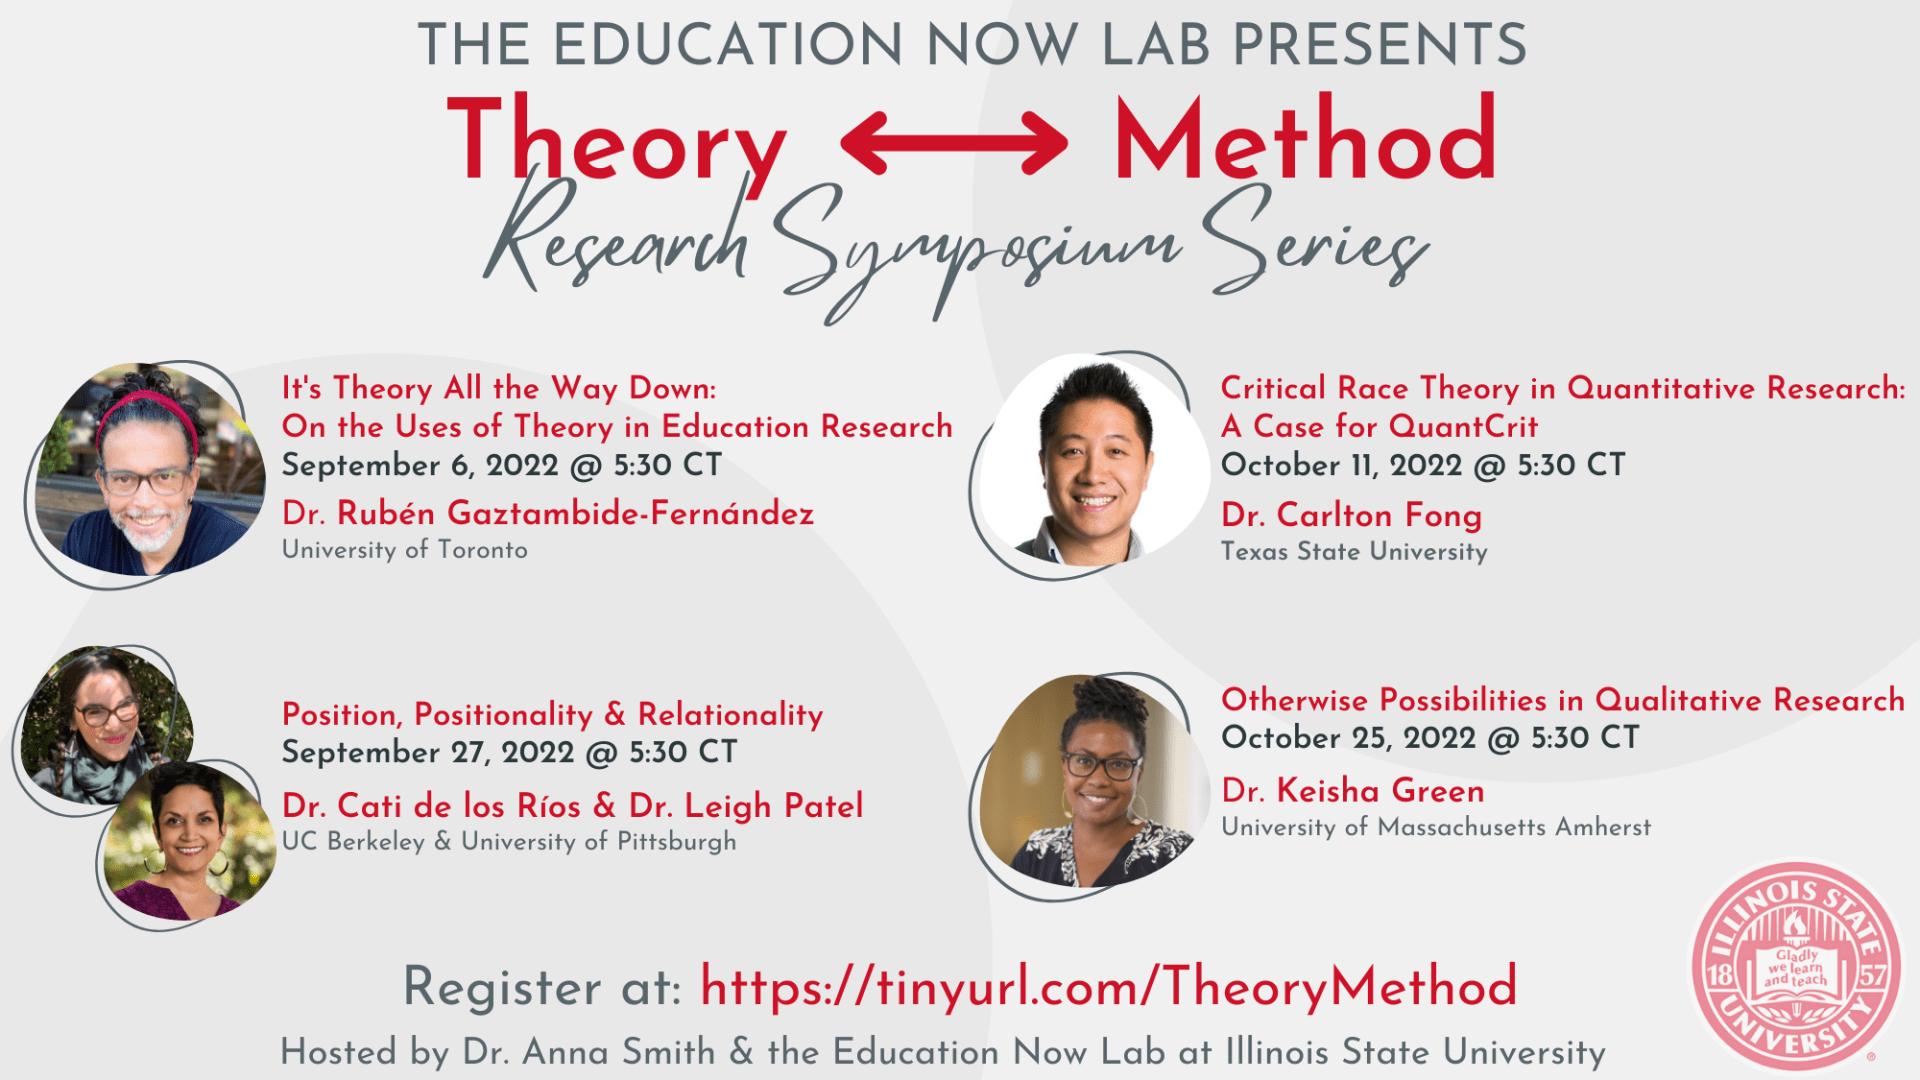 Symposium Series Event Poster
The Education Now Lab Presents: Theory to Method Research Symposium Series 